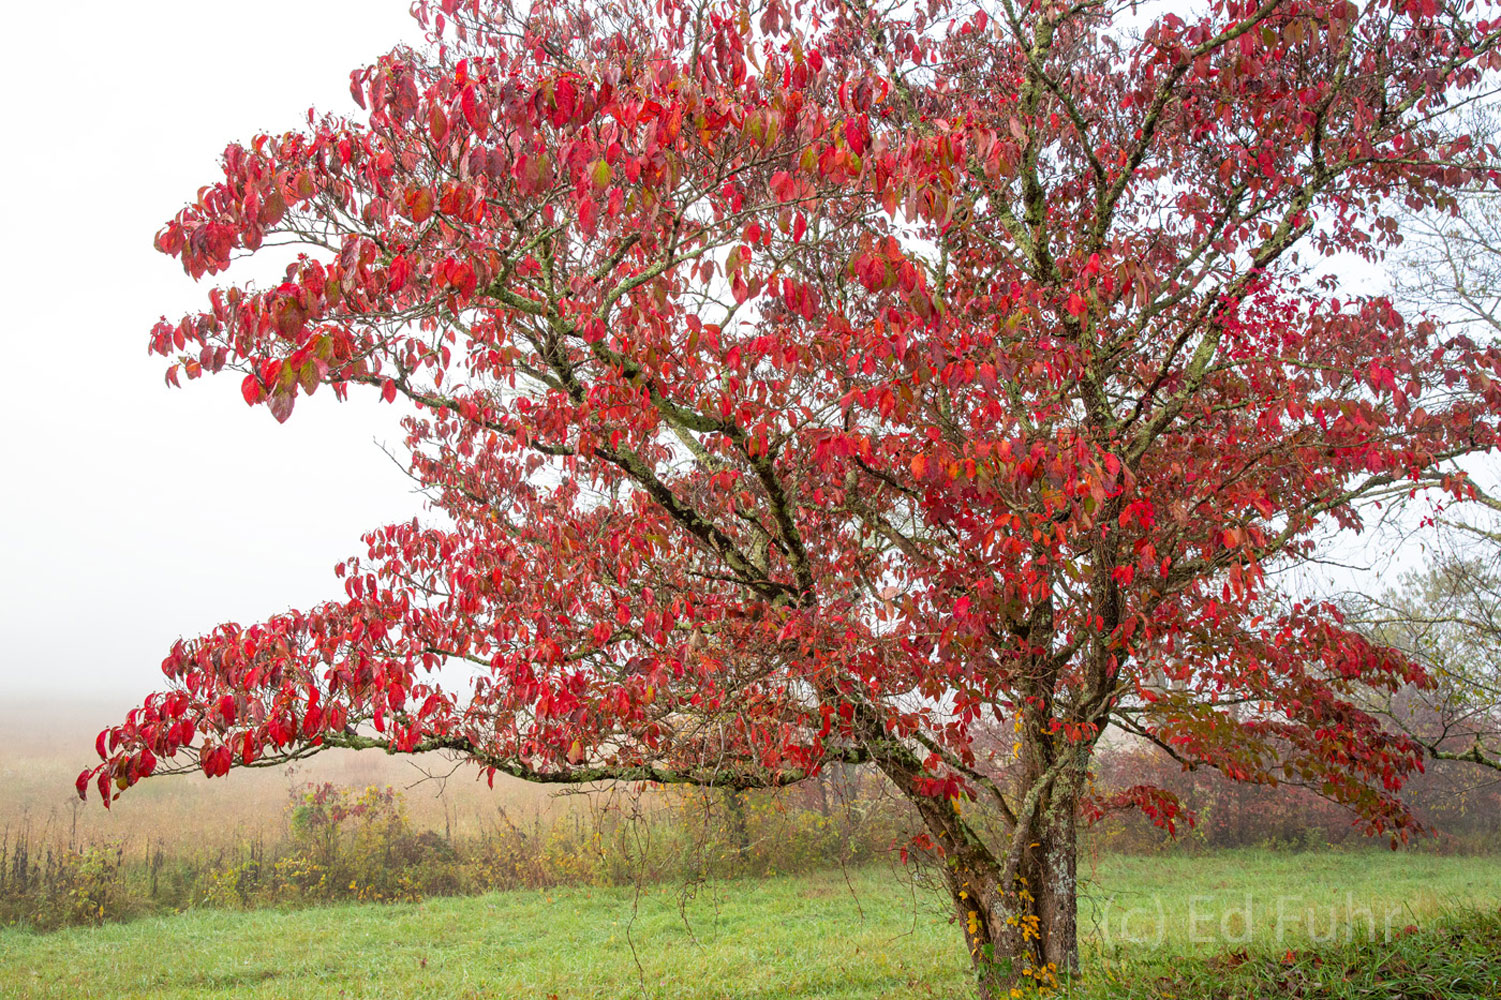 An dogwood puts forth a final fiery display in the cool of an autumn fog.